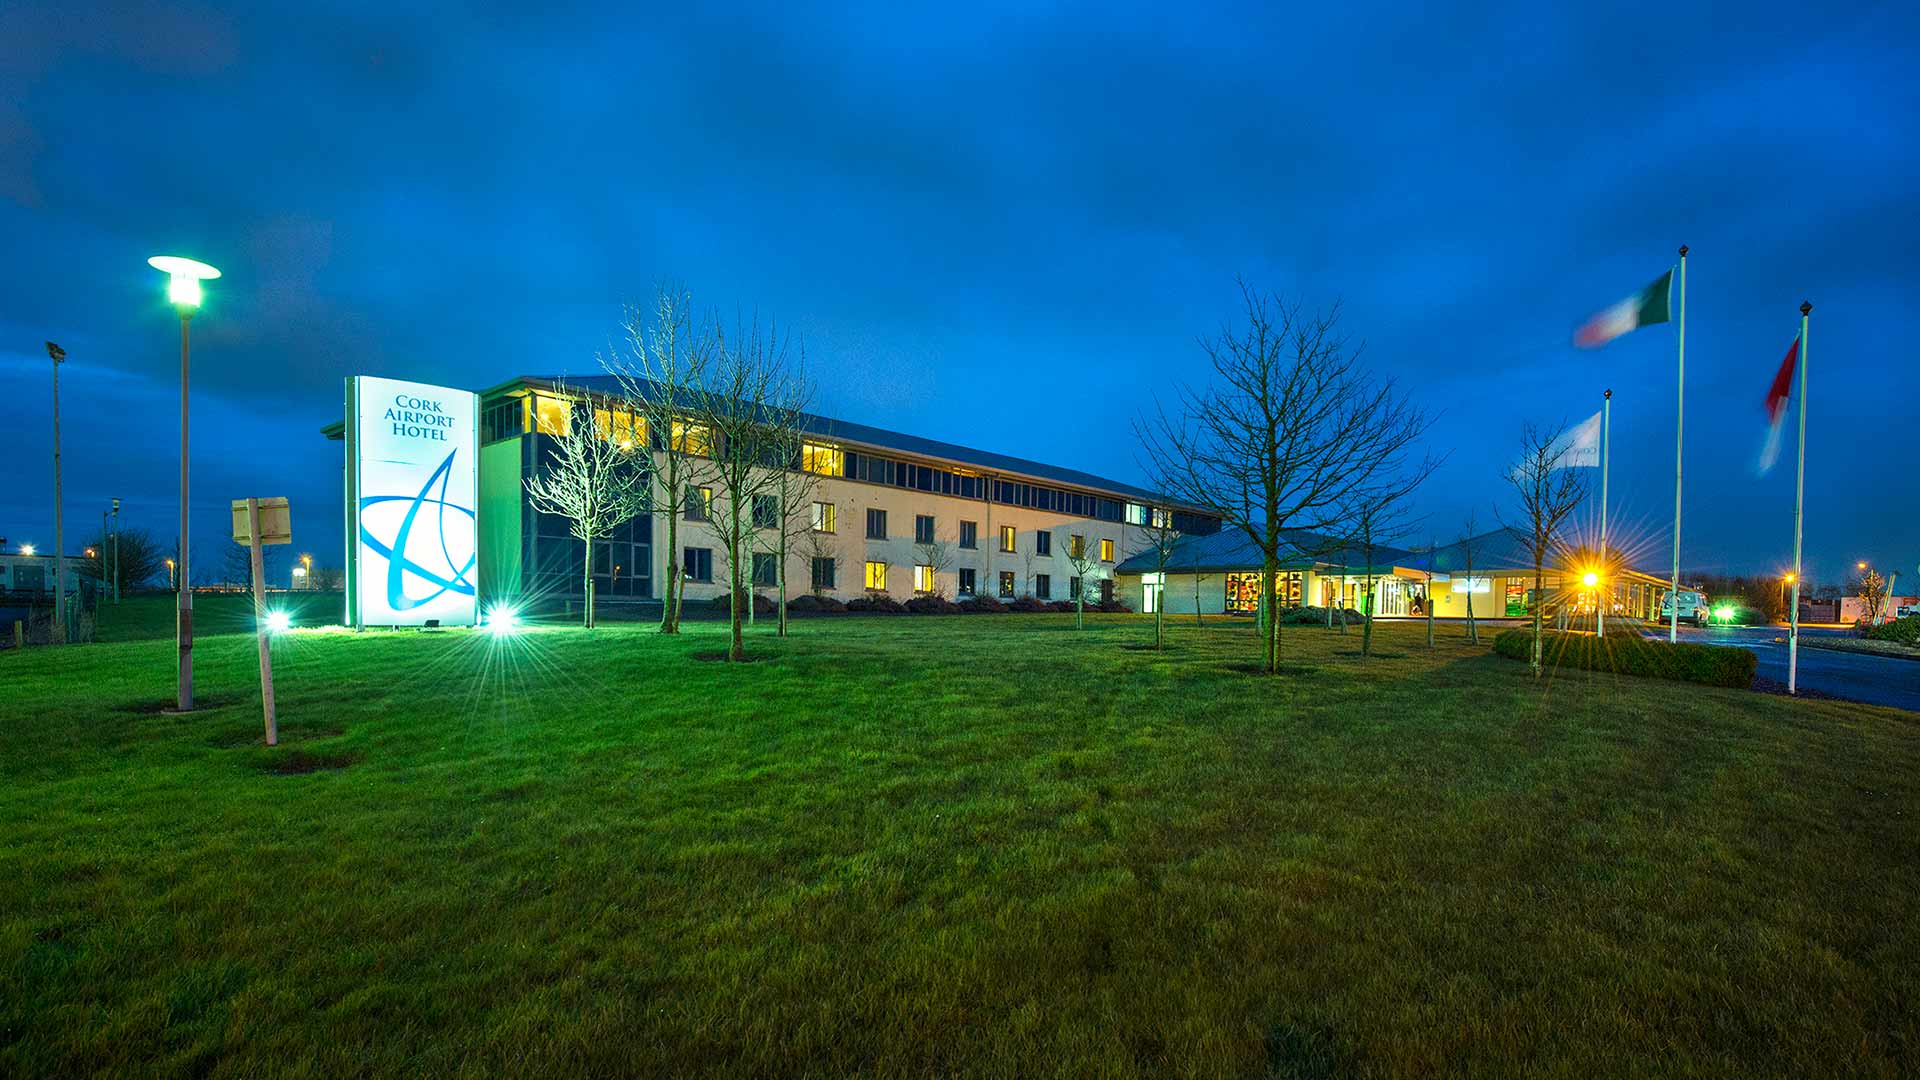 Nighttime view of the Cork Airport Hotel